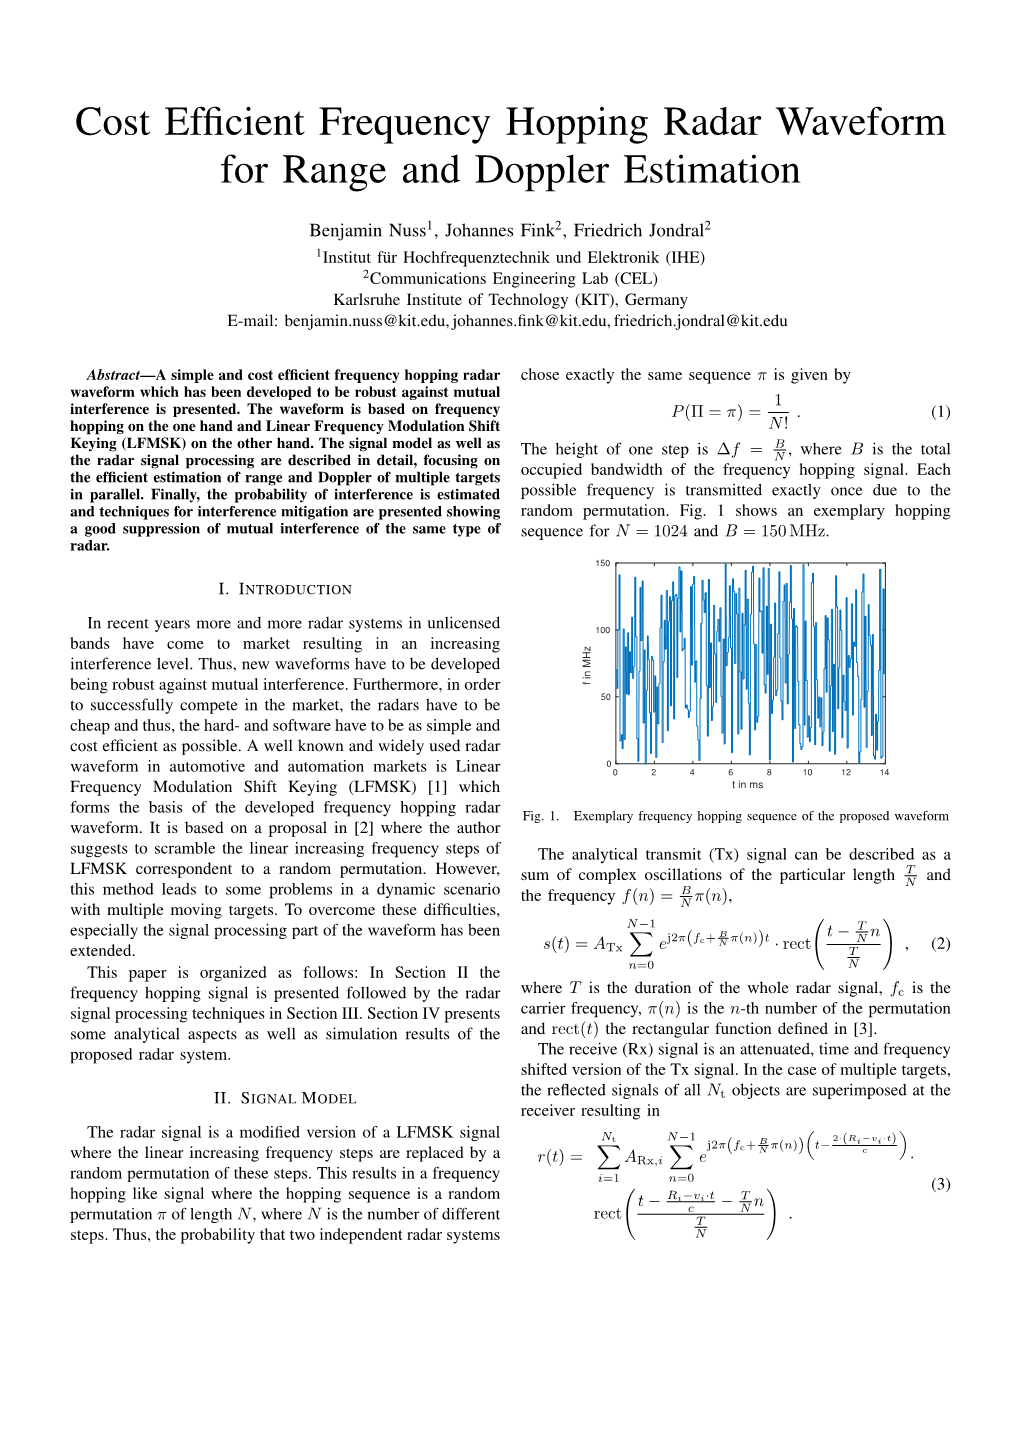 Cost Efficient Frequency Hopping Radar Waveform for Range And